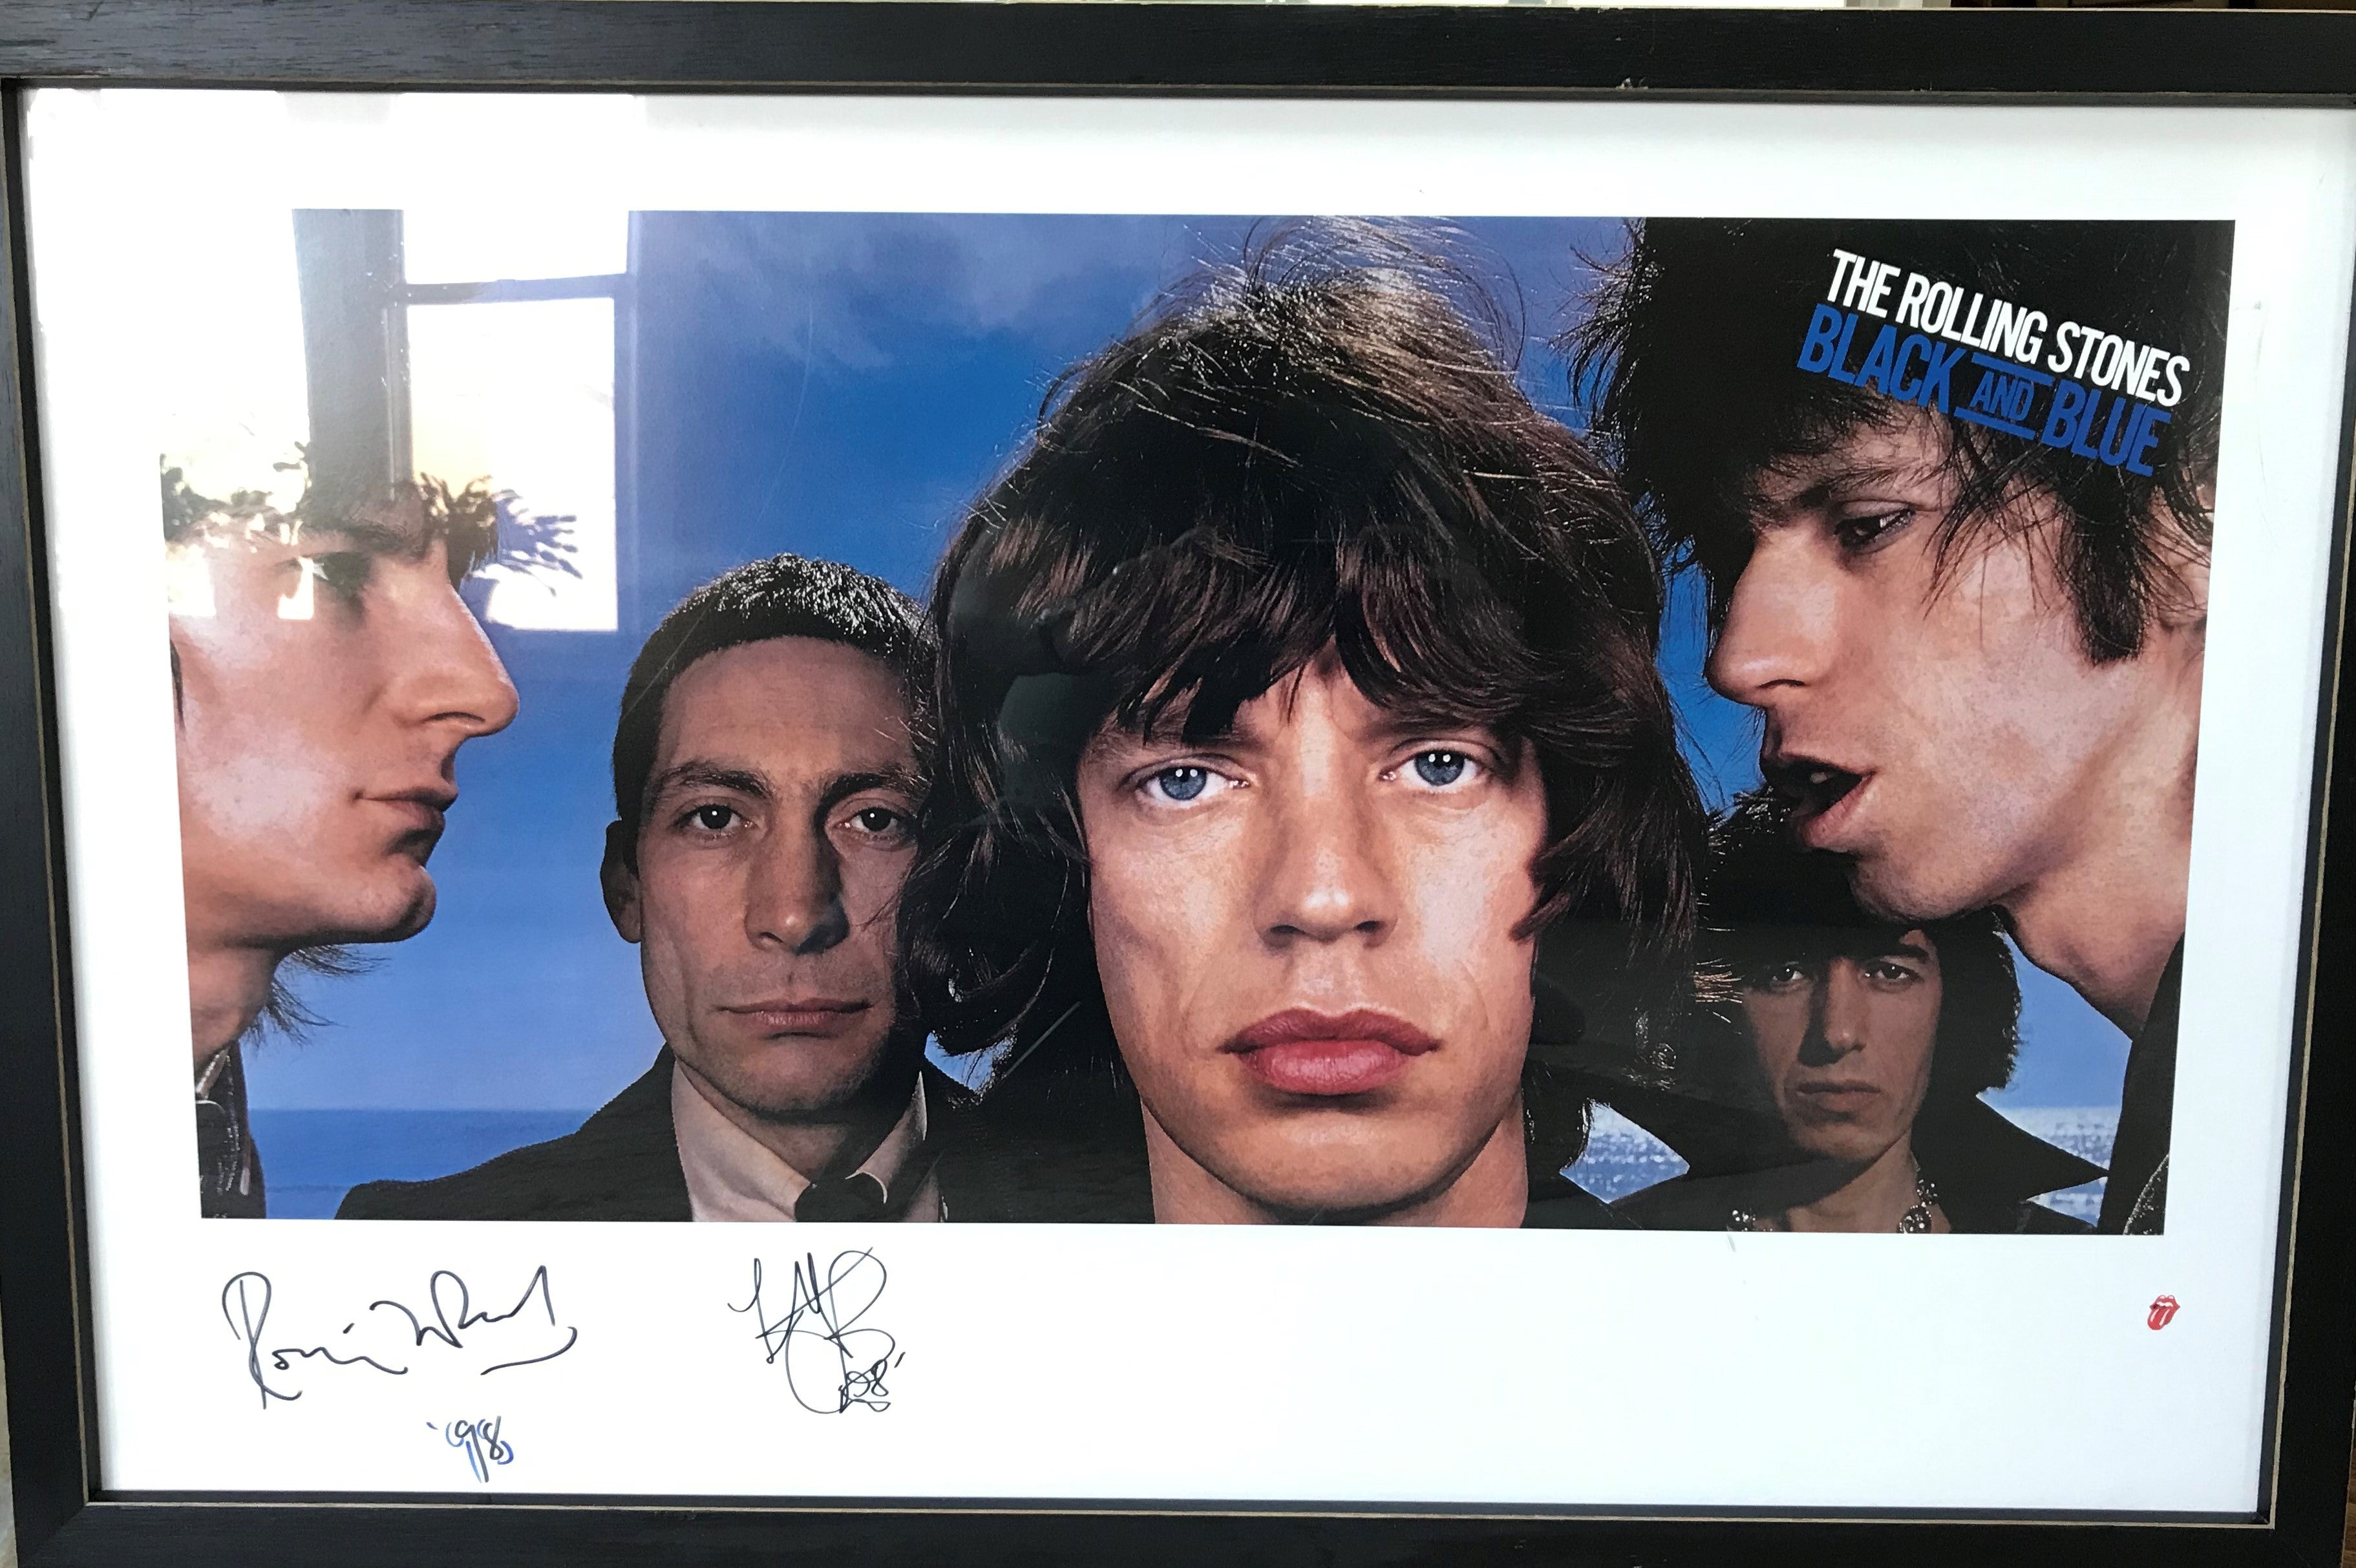 Black & Blue - The Rolling Stones signed by Charlie Watts and Ronnie Wood